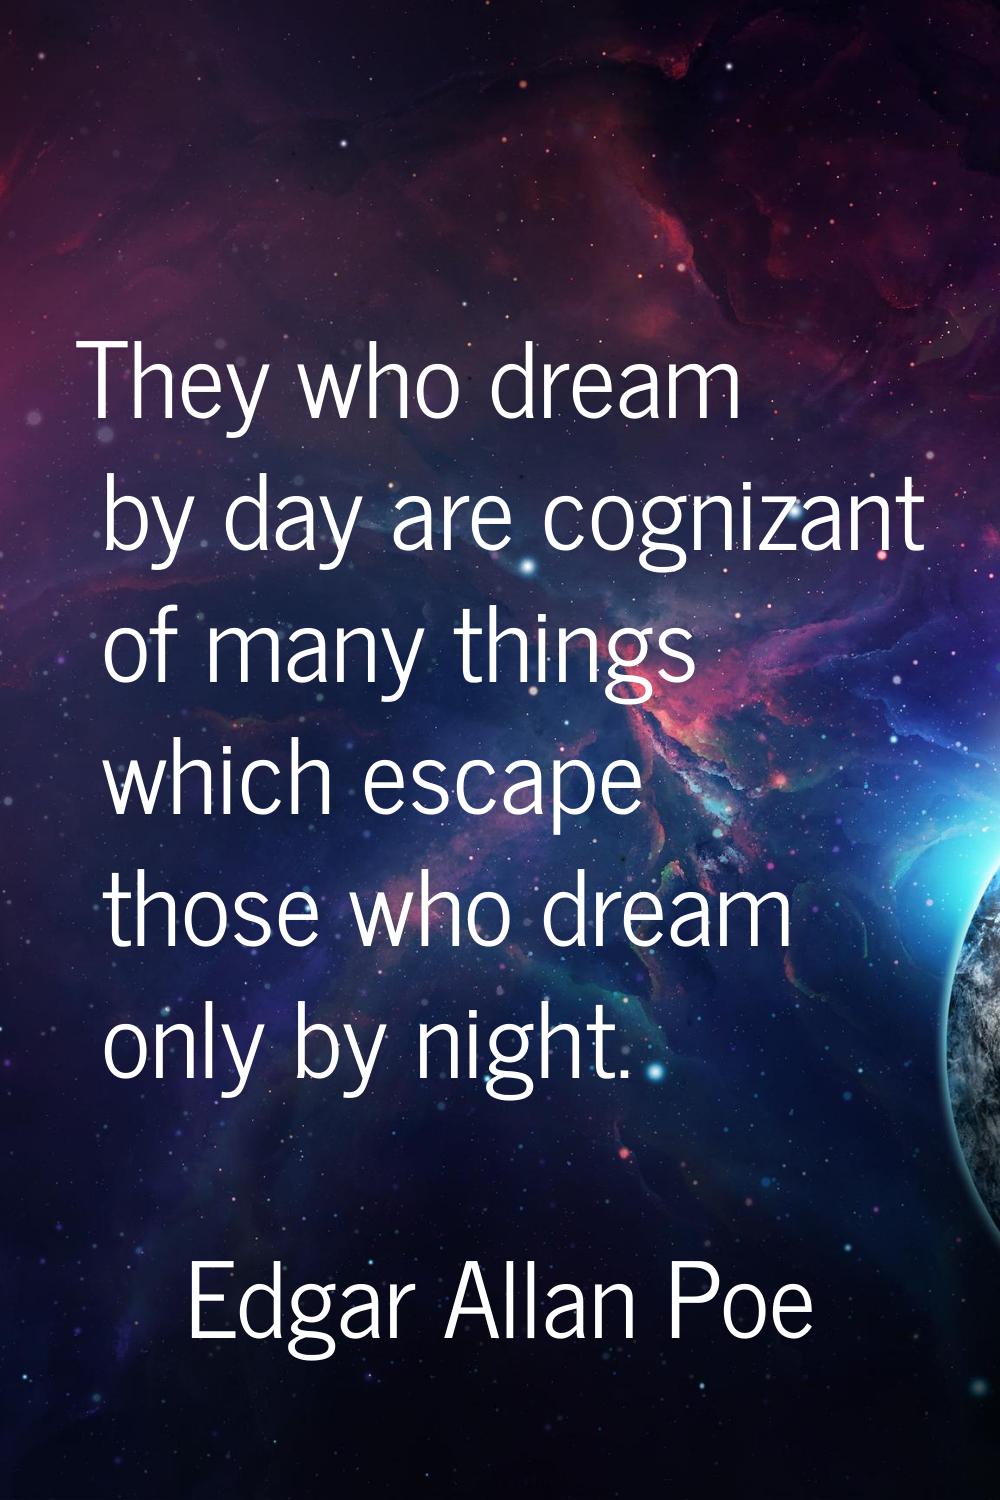 They who dream by day are cognizant of many things which escape those who dream only by night.